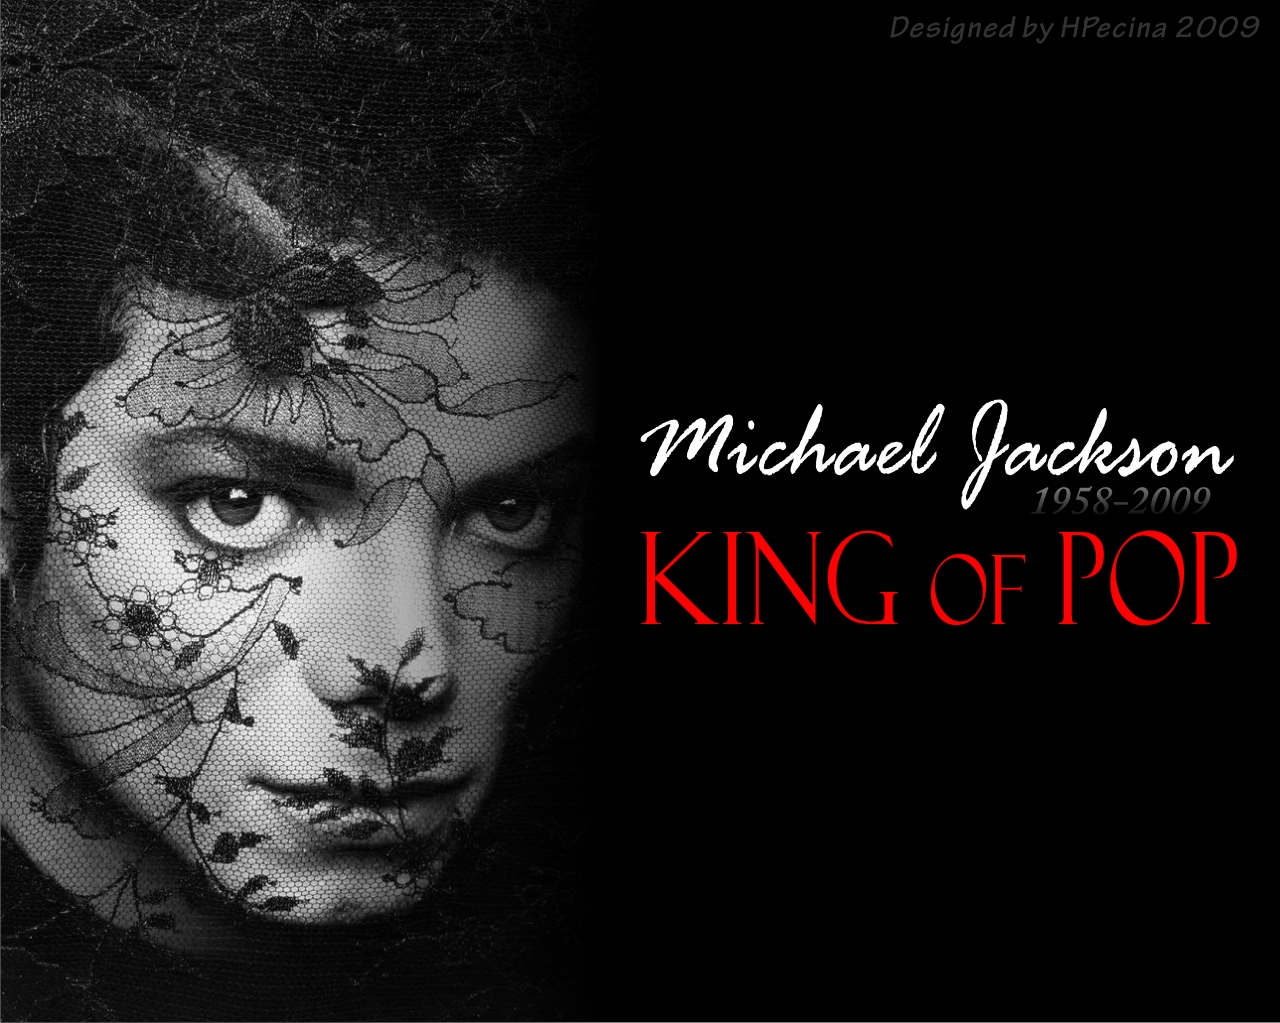 Wallpaper Of Michael Jackson In His Glory Days And The